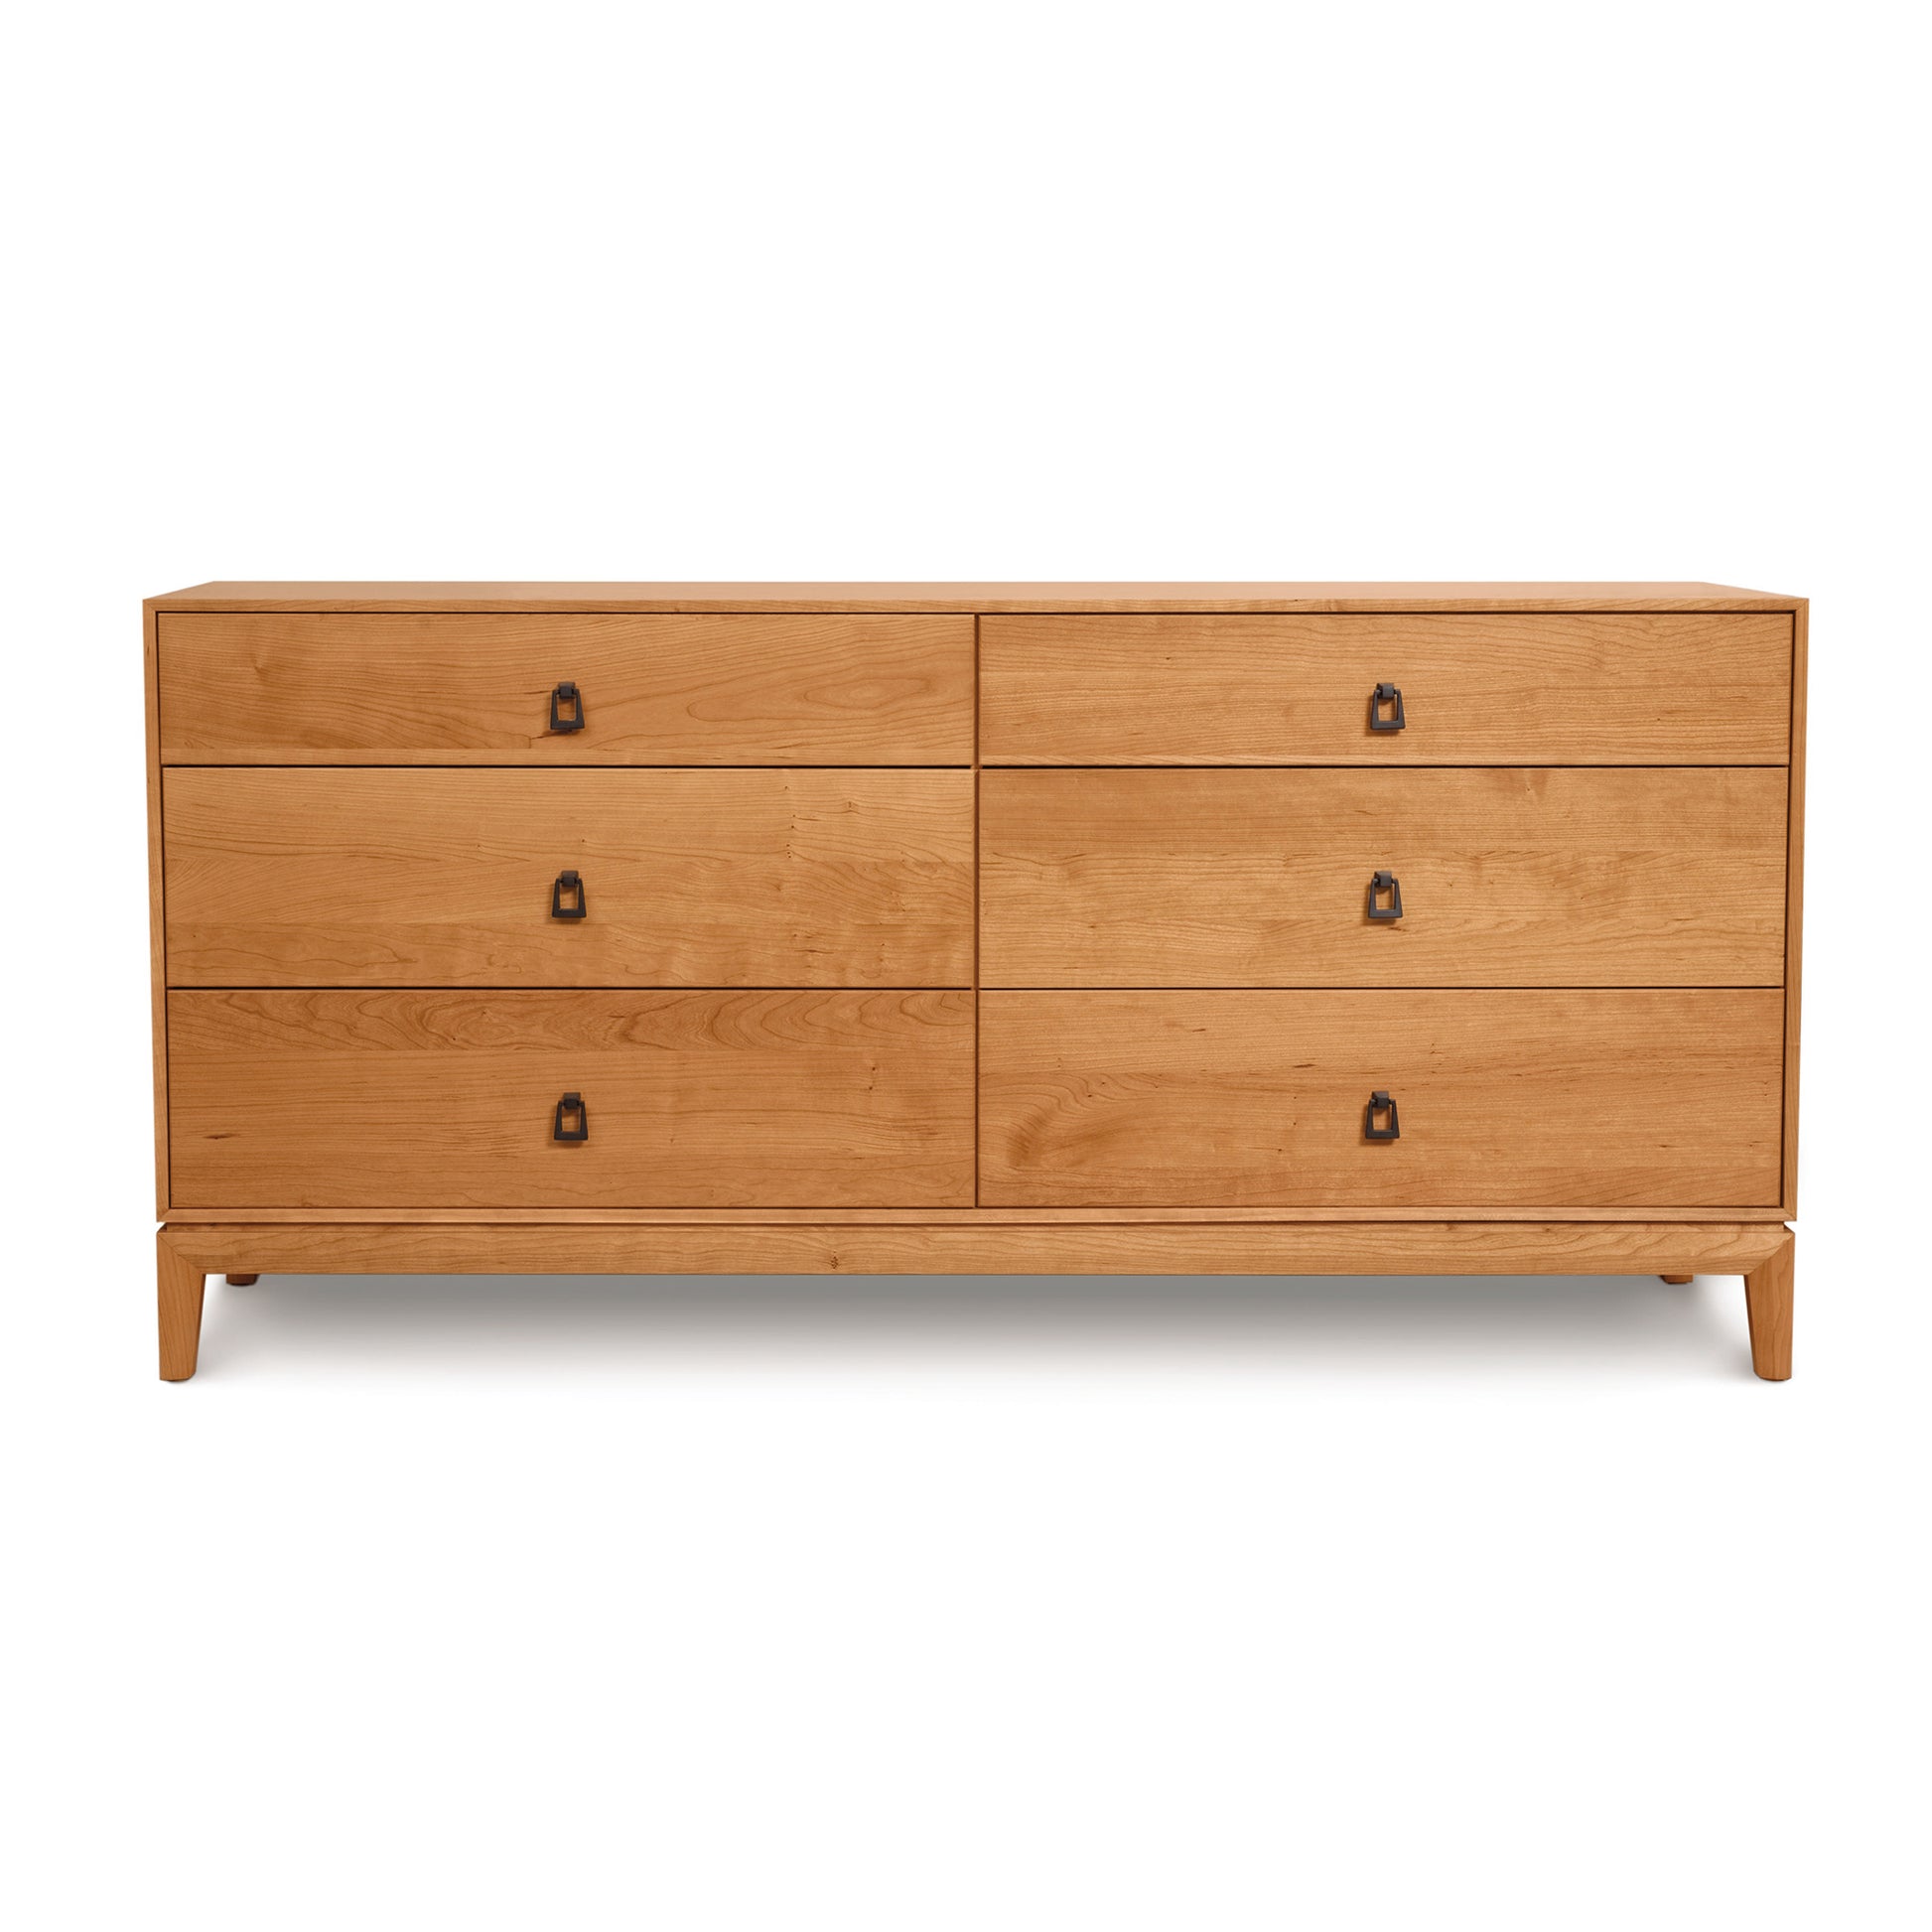 A Mansfield 6-Drawer Dresser in the Arts and Crafts style, with metal handles, displayed against a white background.